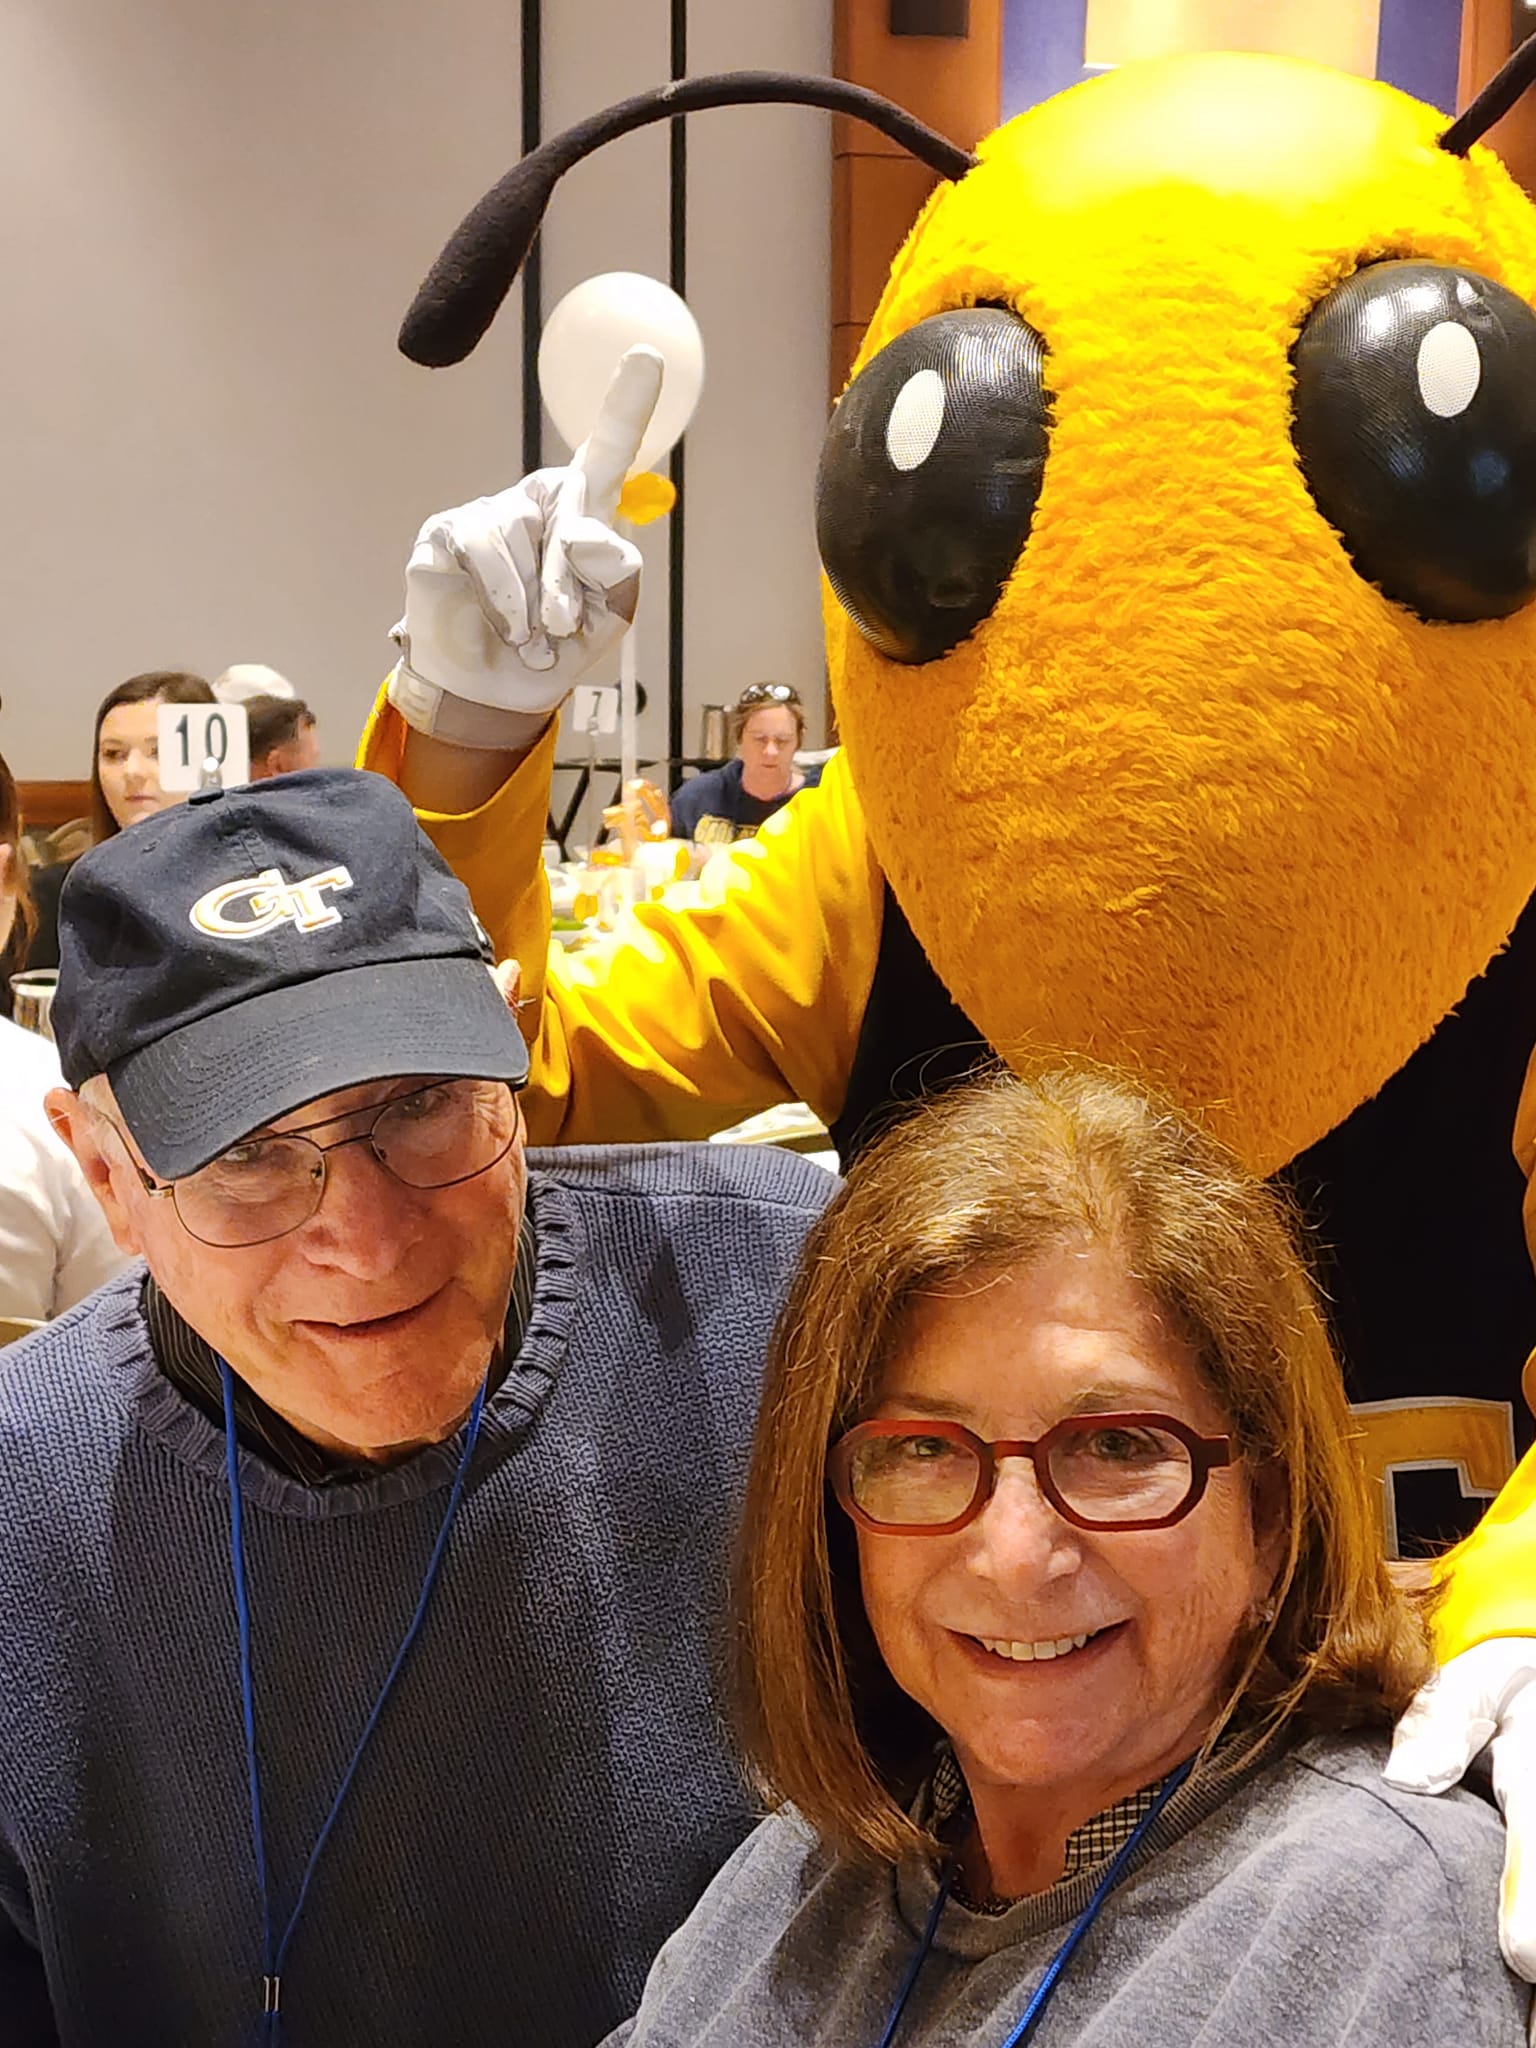 Grandpa is wearing a Georgia Tech baseball cap, sitting with grandma, and Buzz the yellow jacket stands behind them